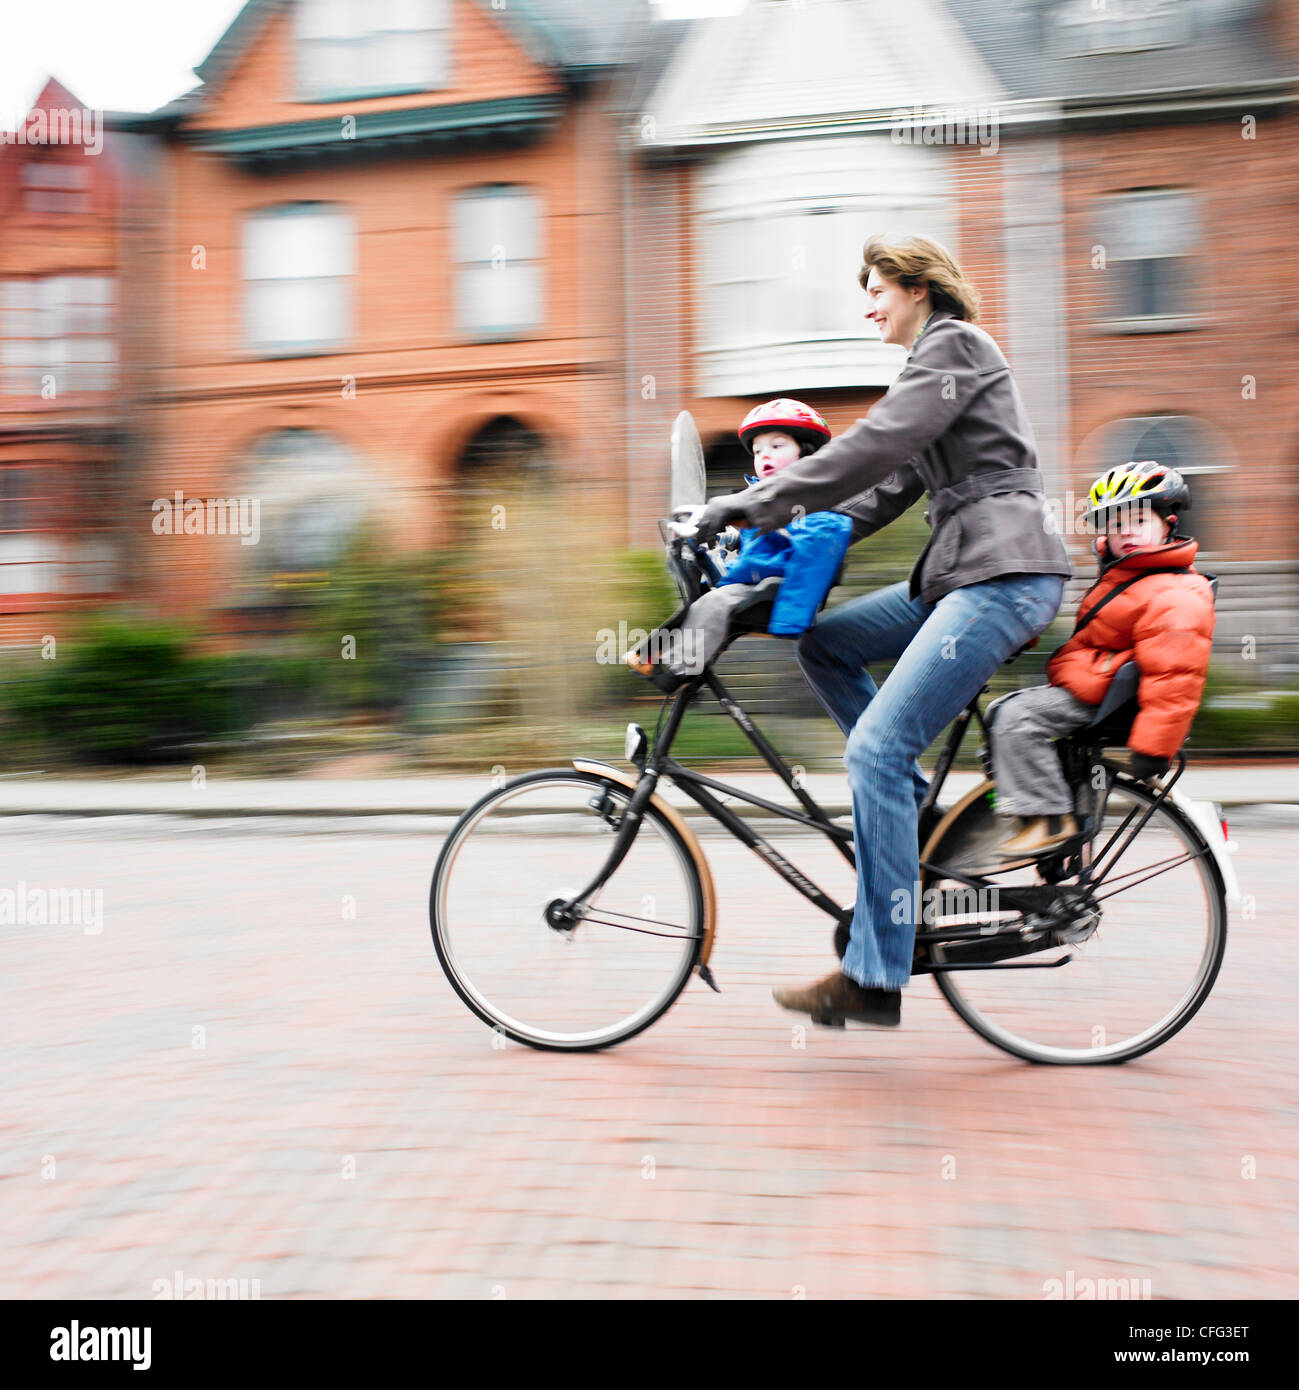 Woman on Bicycle with two kids, Cabbagetown, Toronto, ON Stock Photo